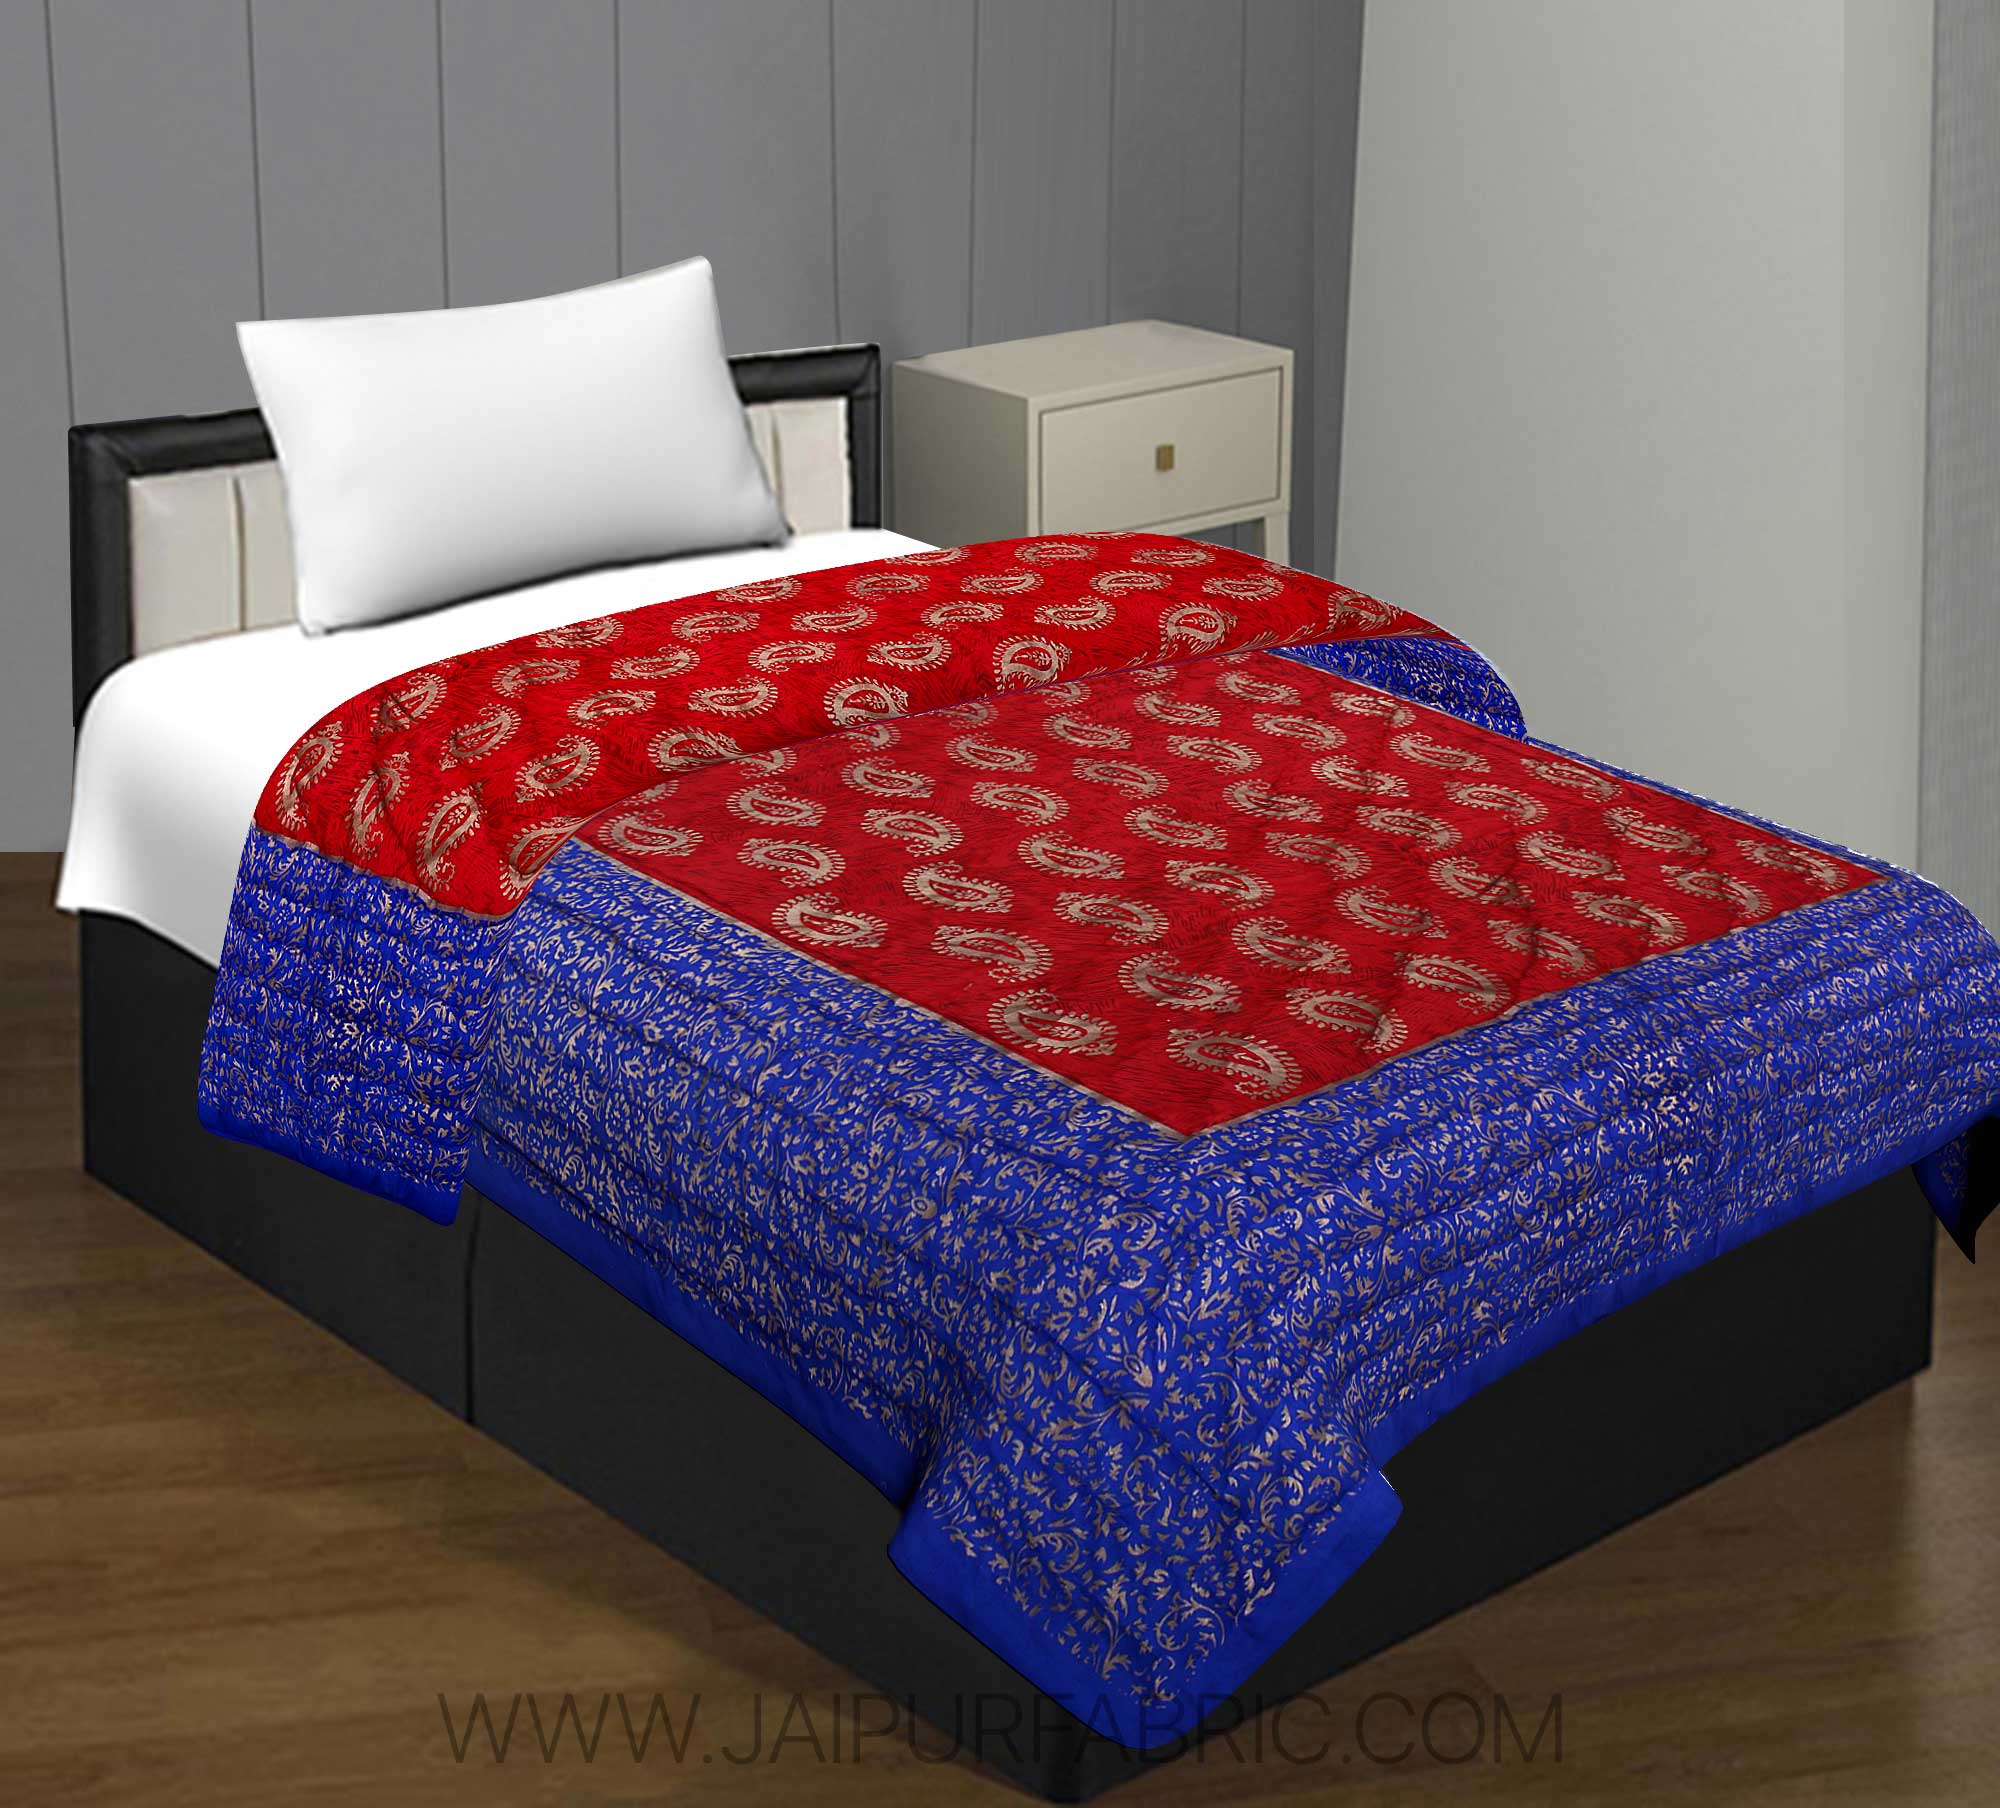 Jaipuri Printed Single Bed Razai Golden Red and blue with Paisley pattern